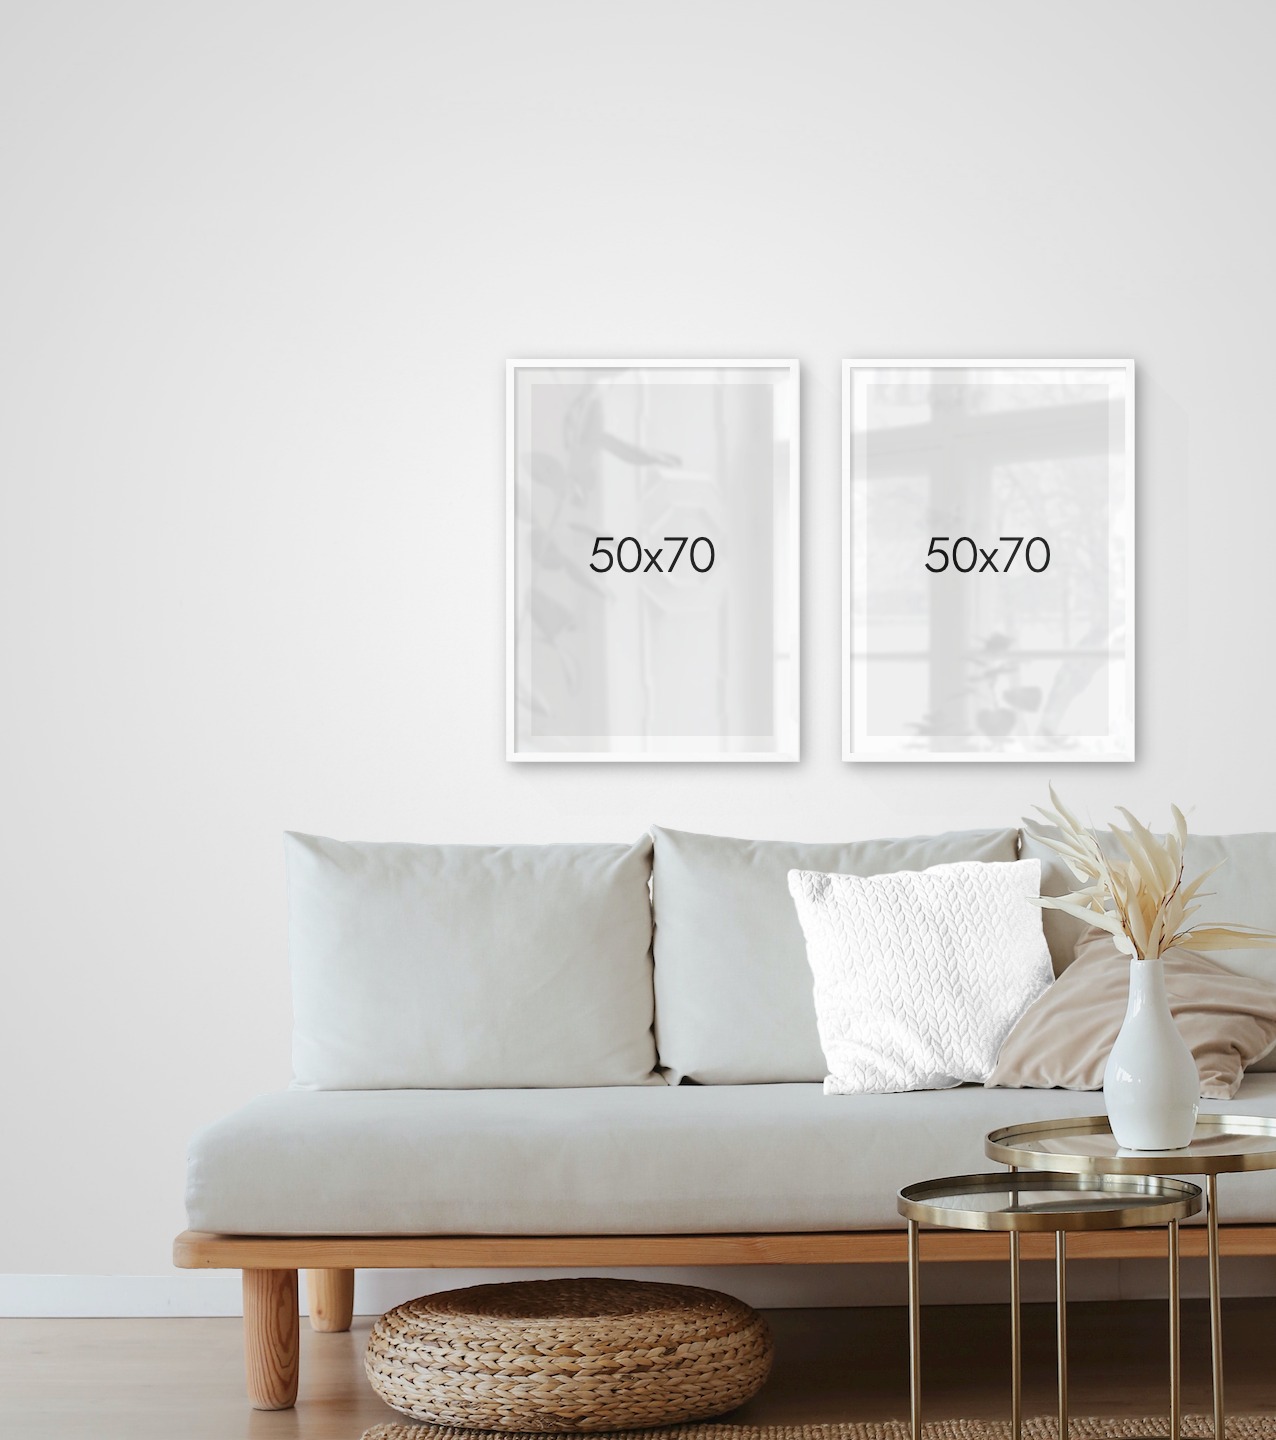 Gallery wall with picture frames in white in sizes 50x70